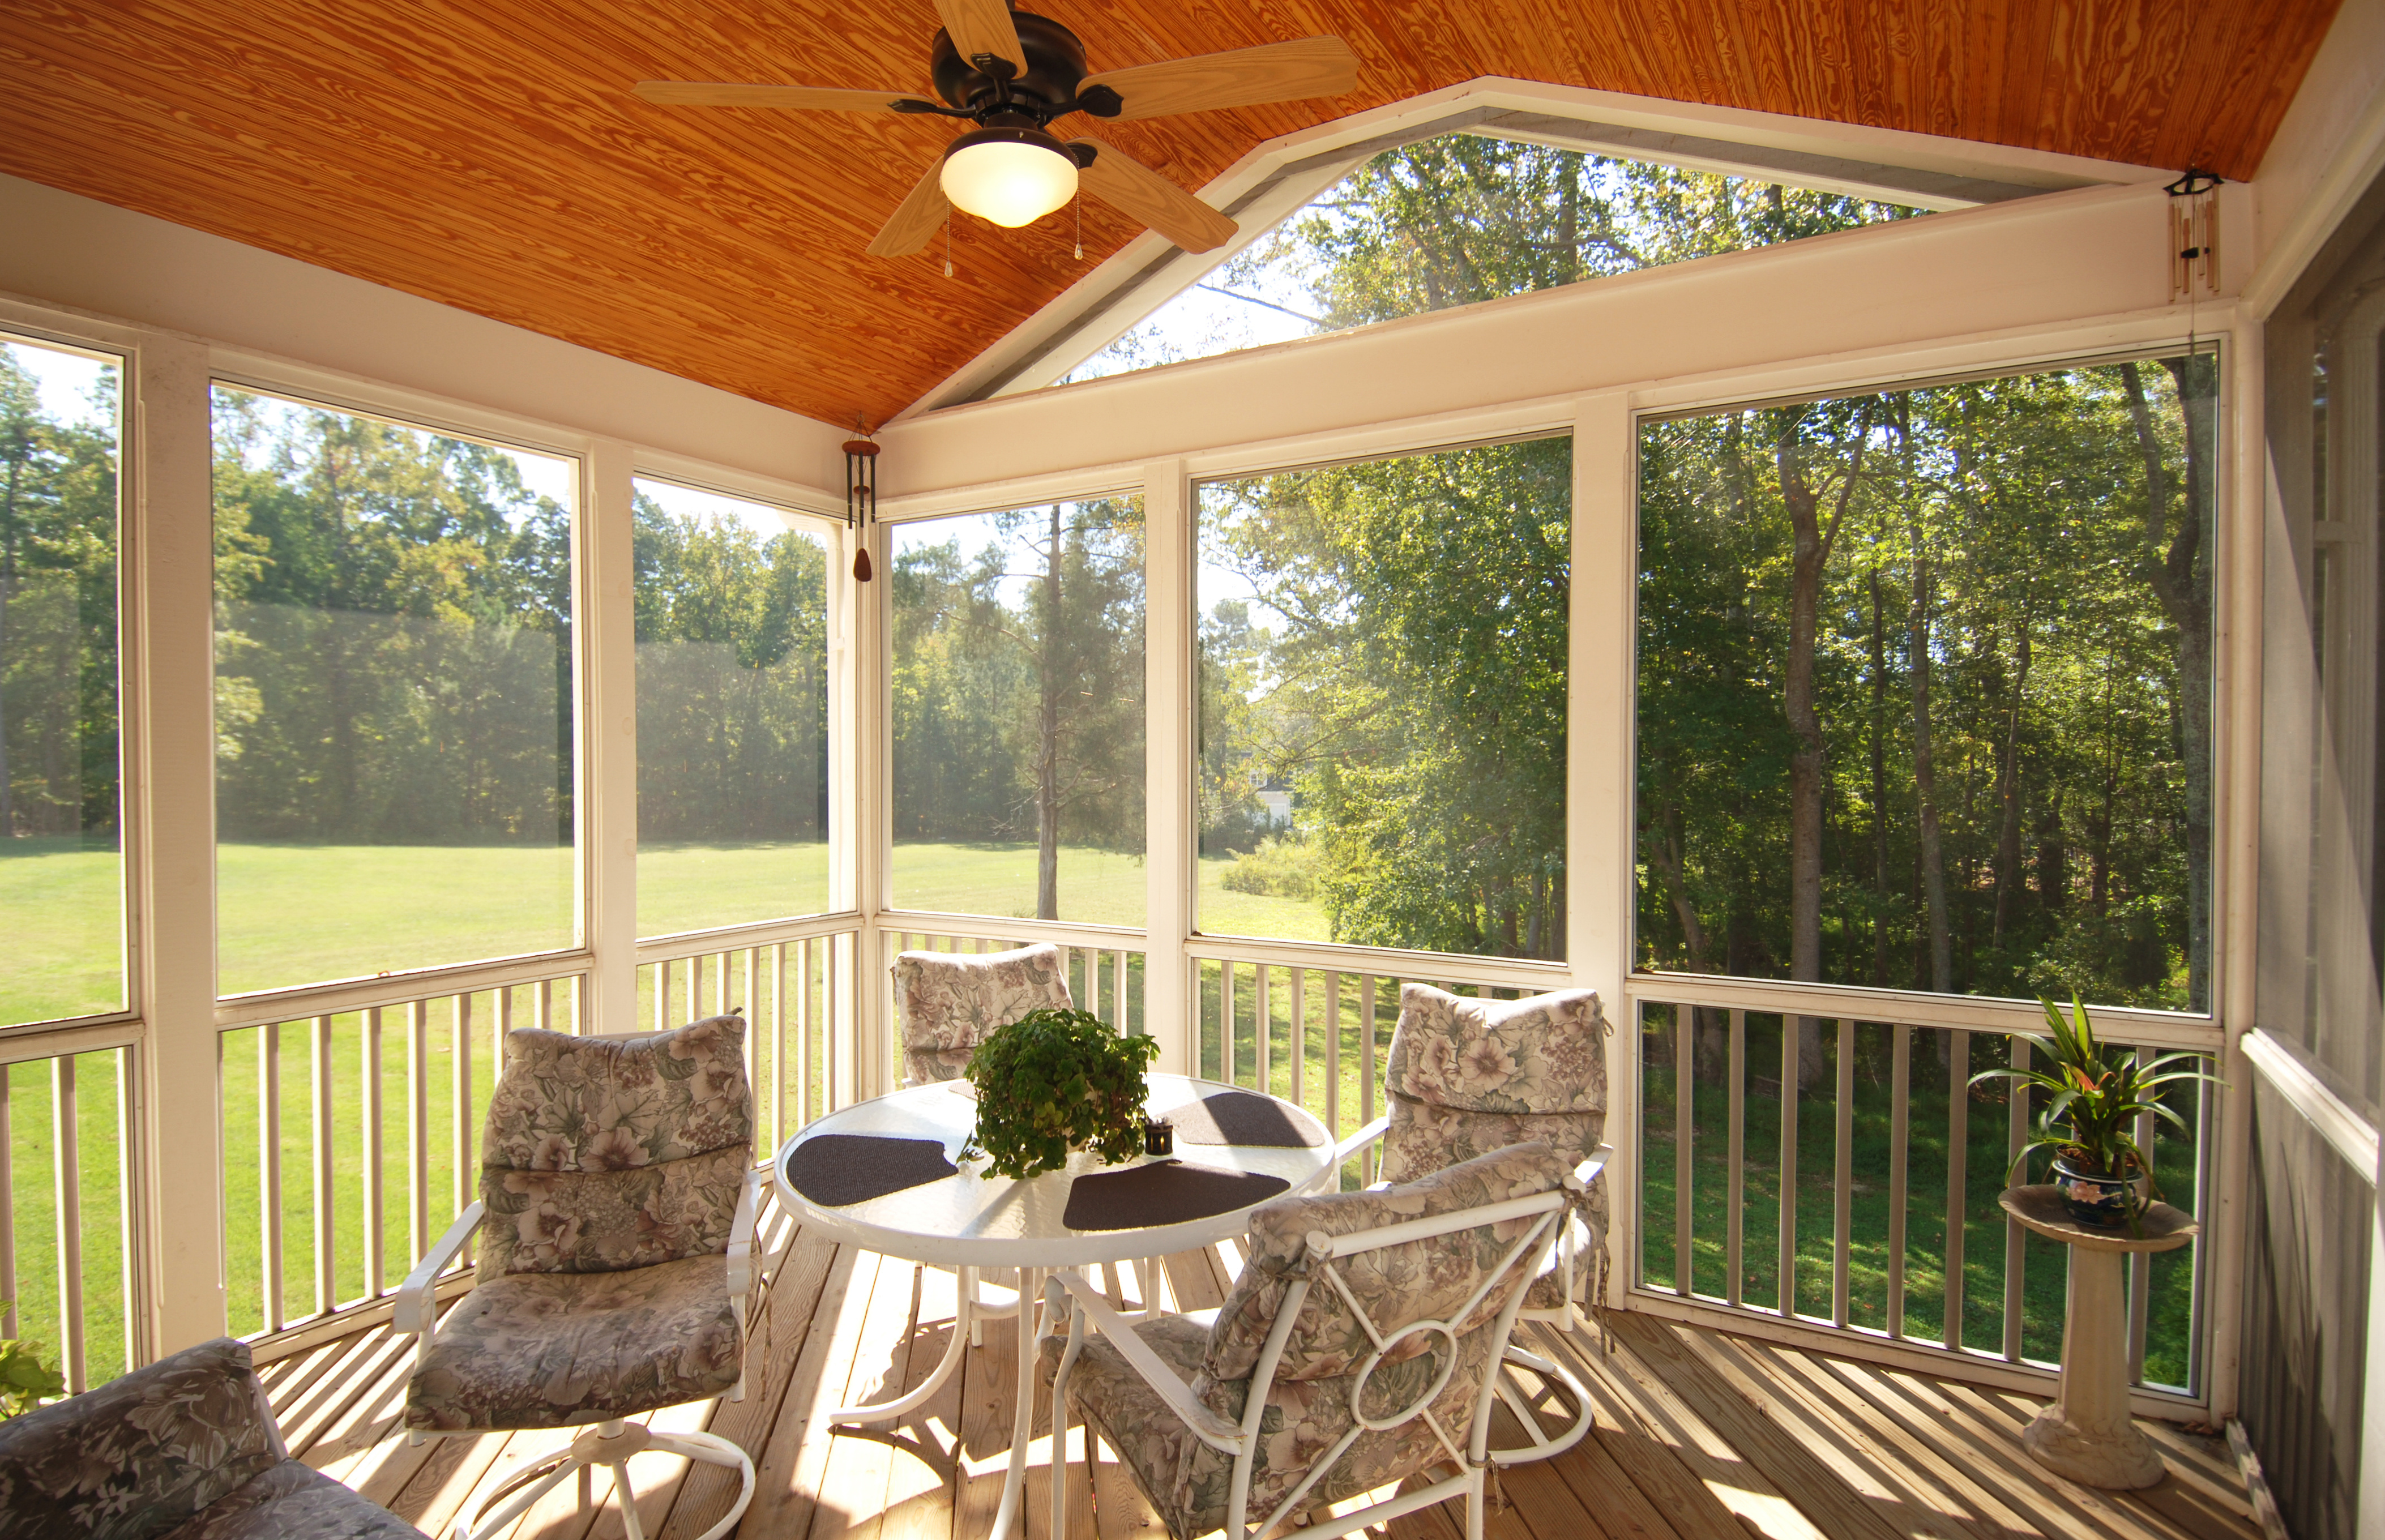 A beautiful coastal-style patio enclosure that is perfect to relax and enjoy the outdoors.